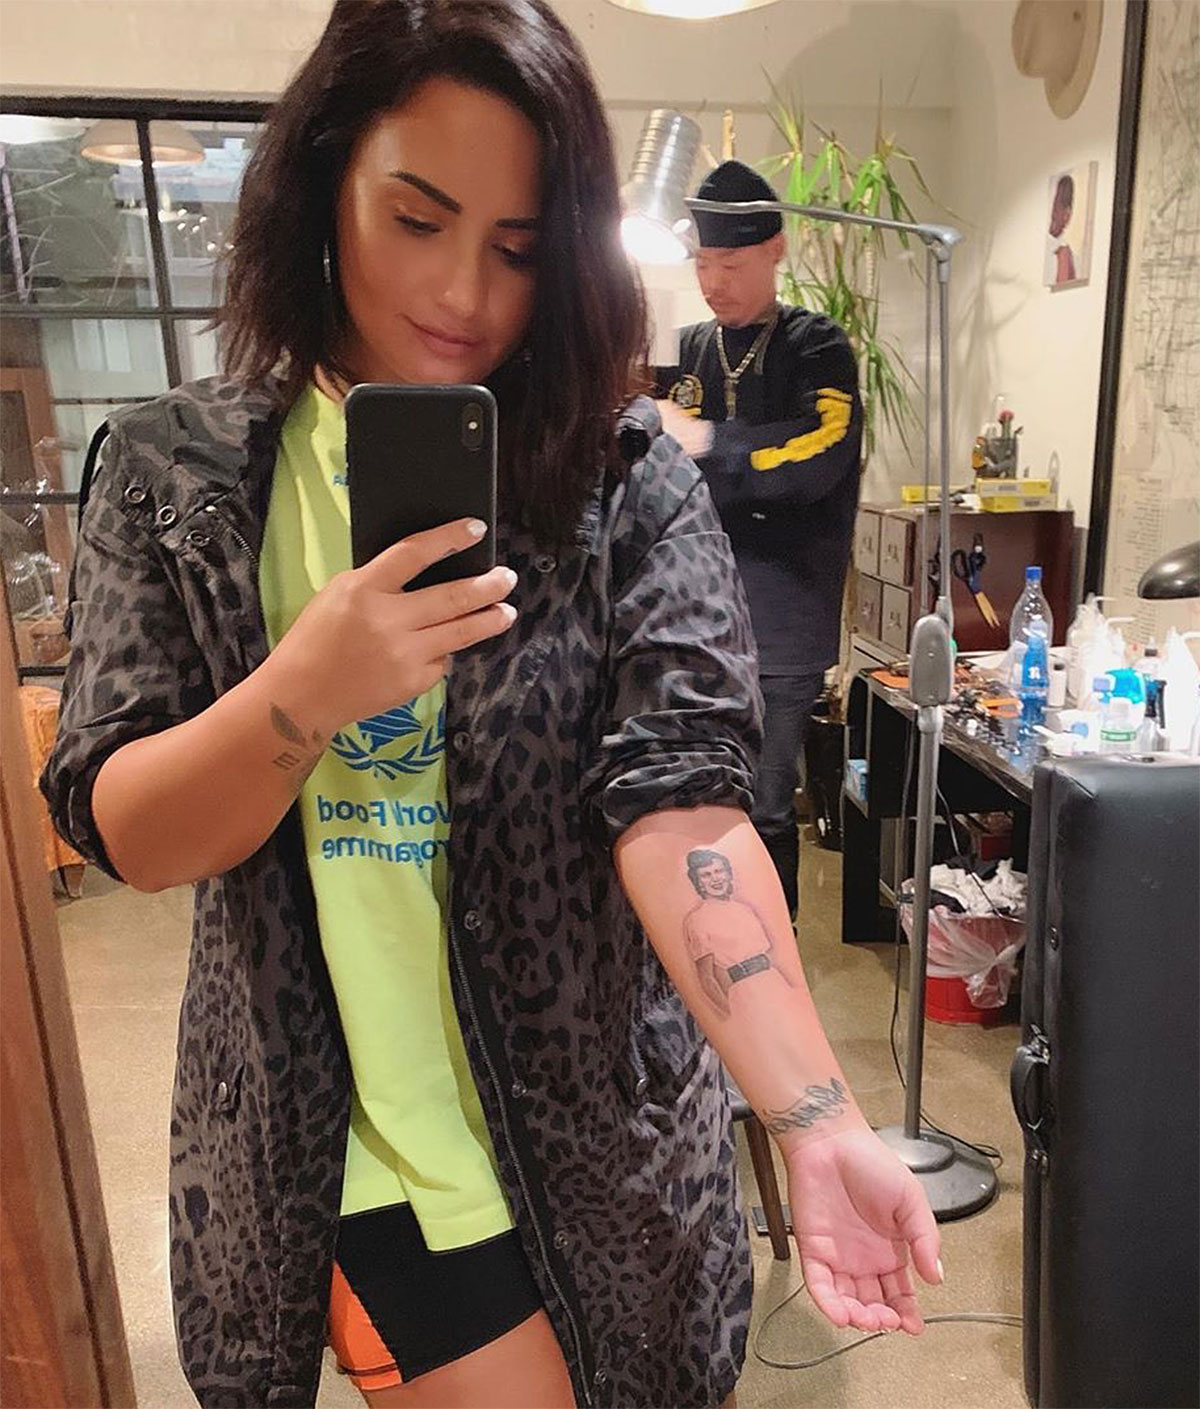 Demi Lovato’s Tattoos Locations, Details, Meanings